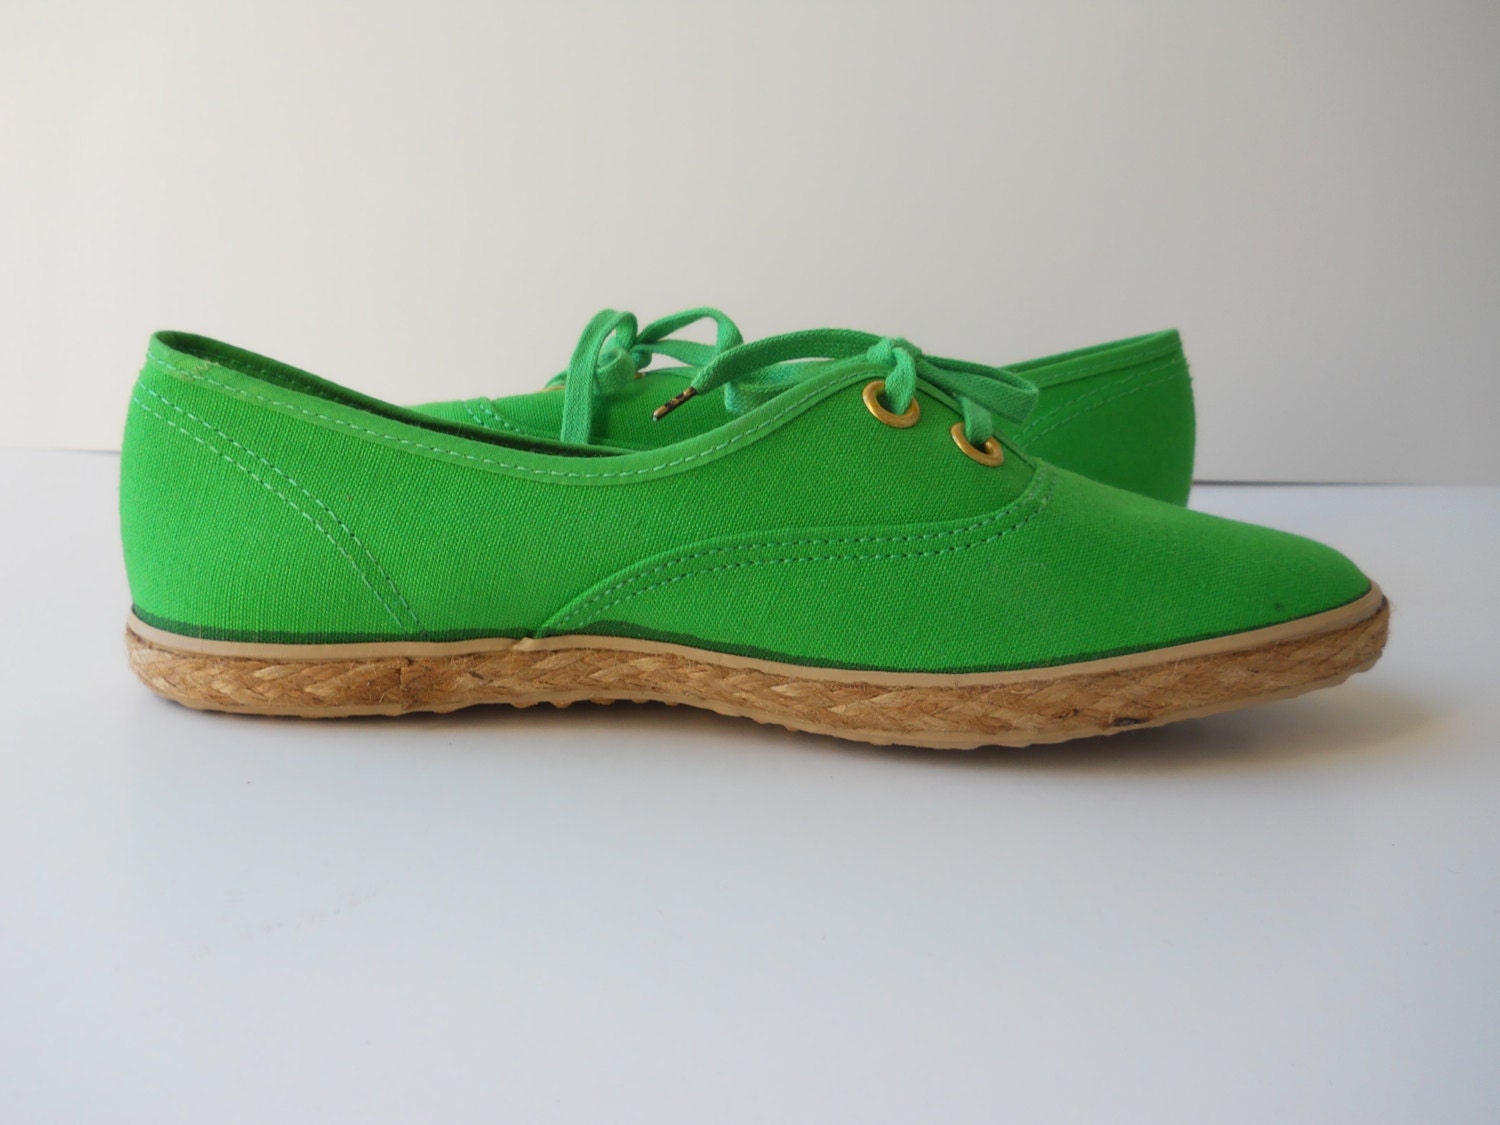 Vintage Green Shoes Women's Casual Shoes Tennis by 19something